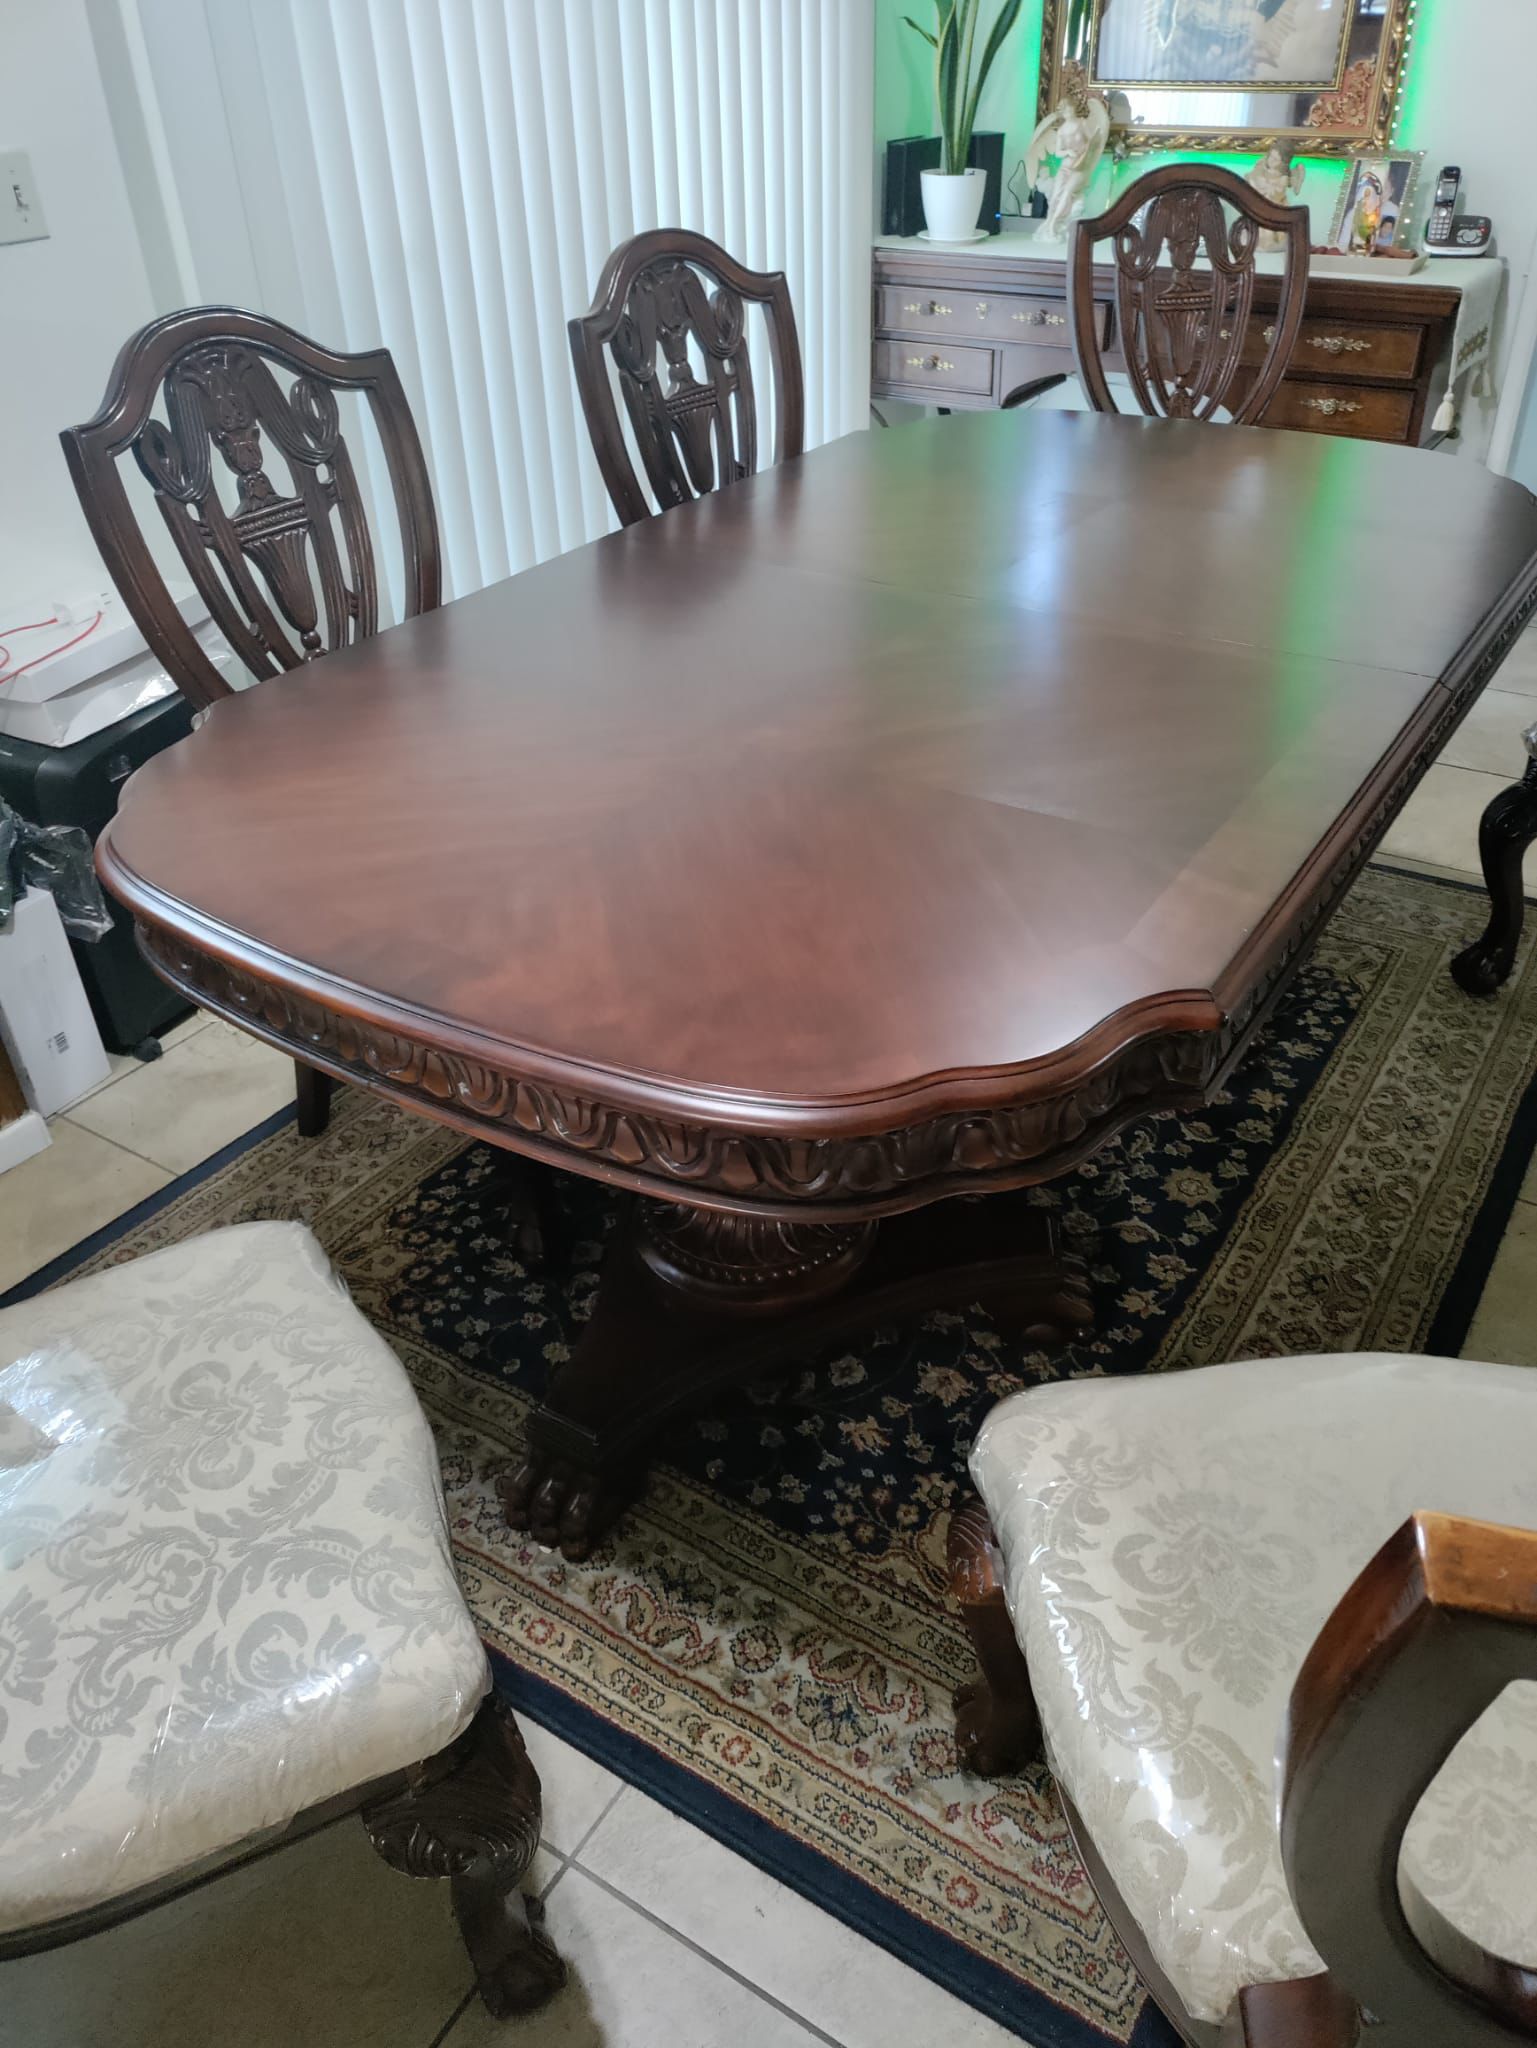 Kitchen Dining table 